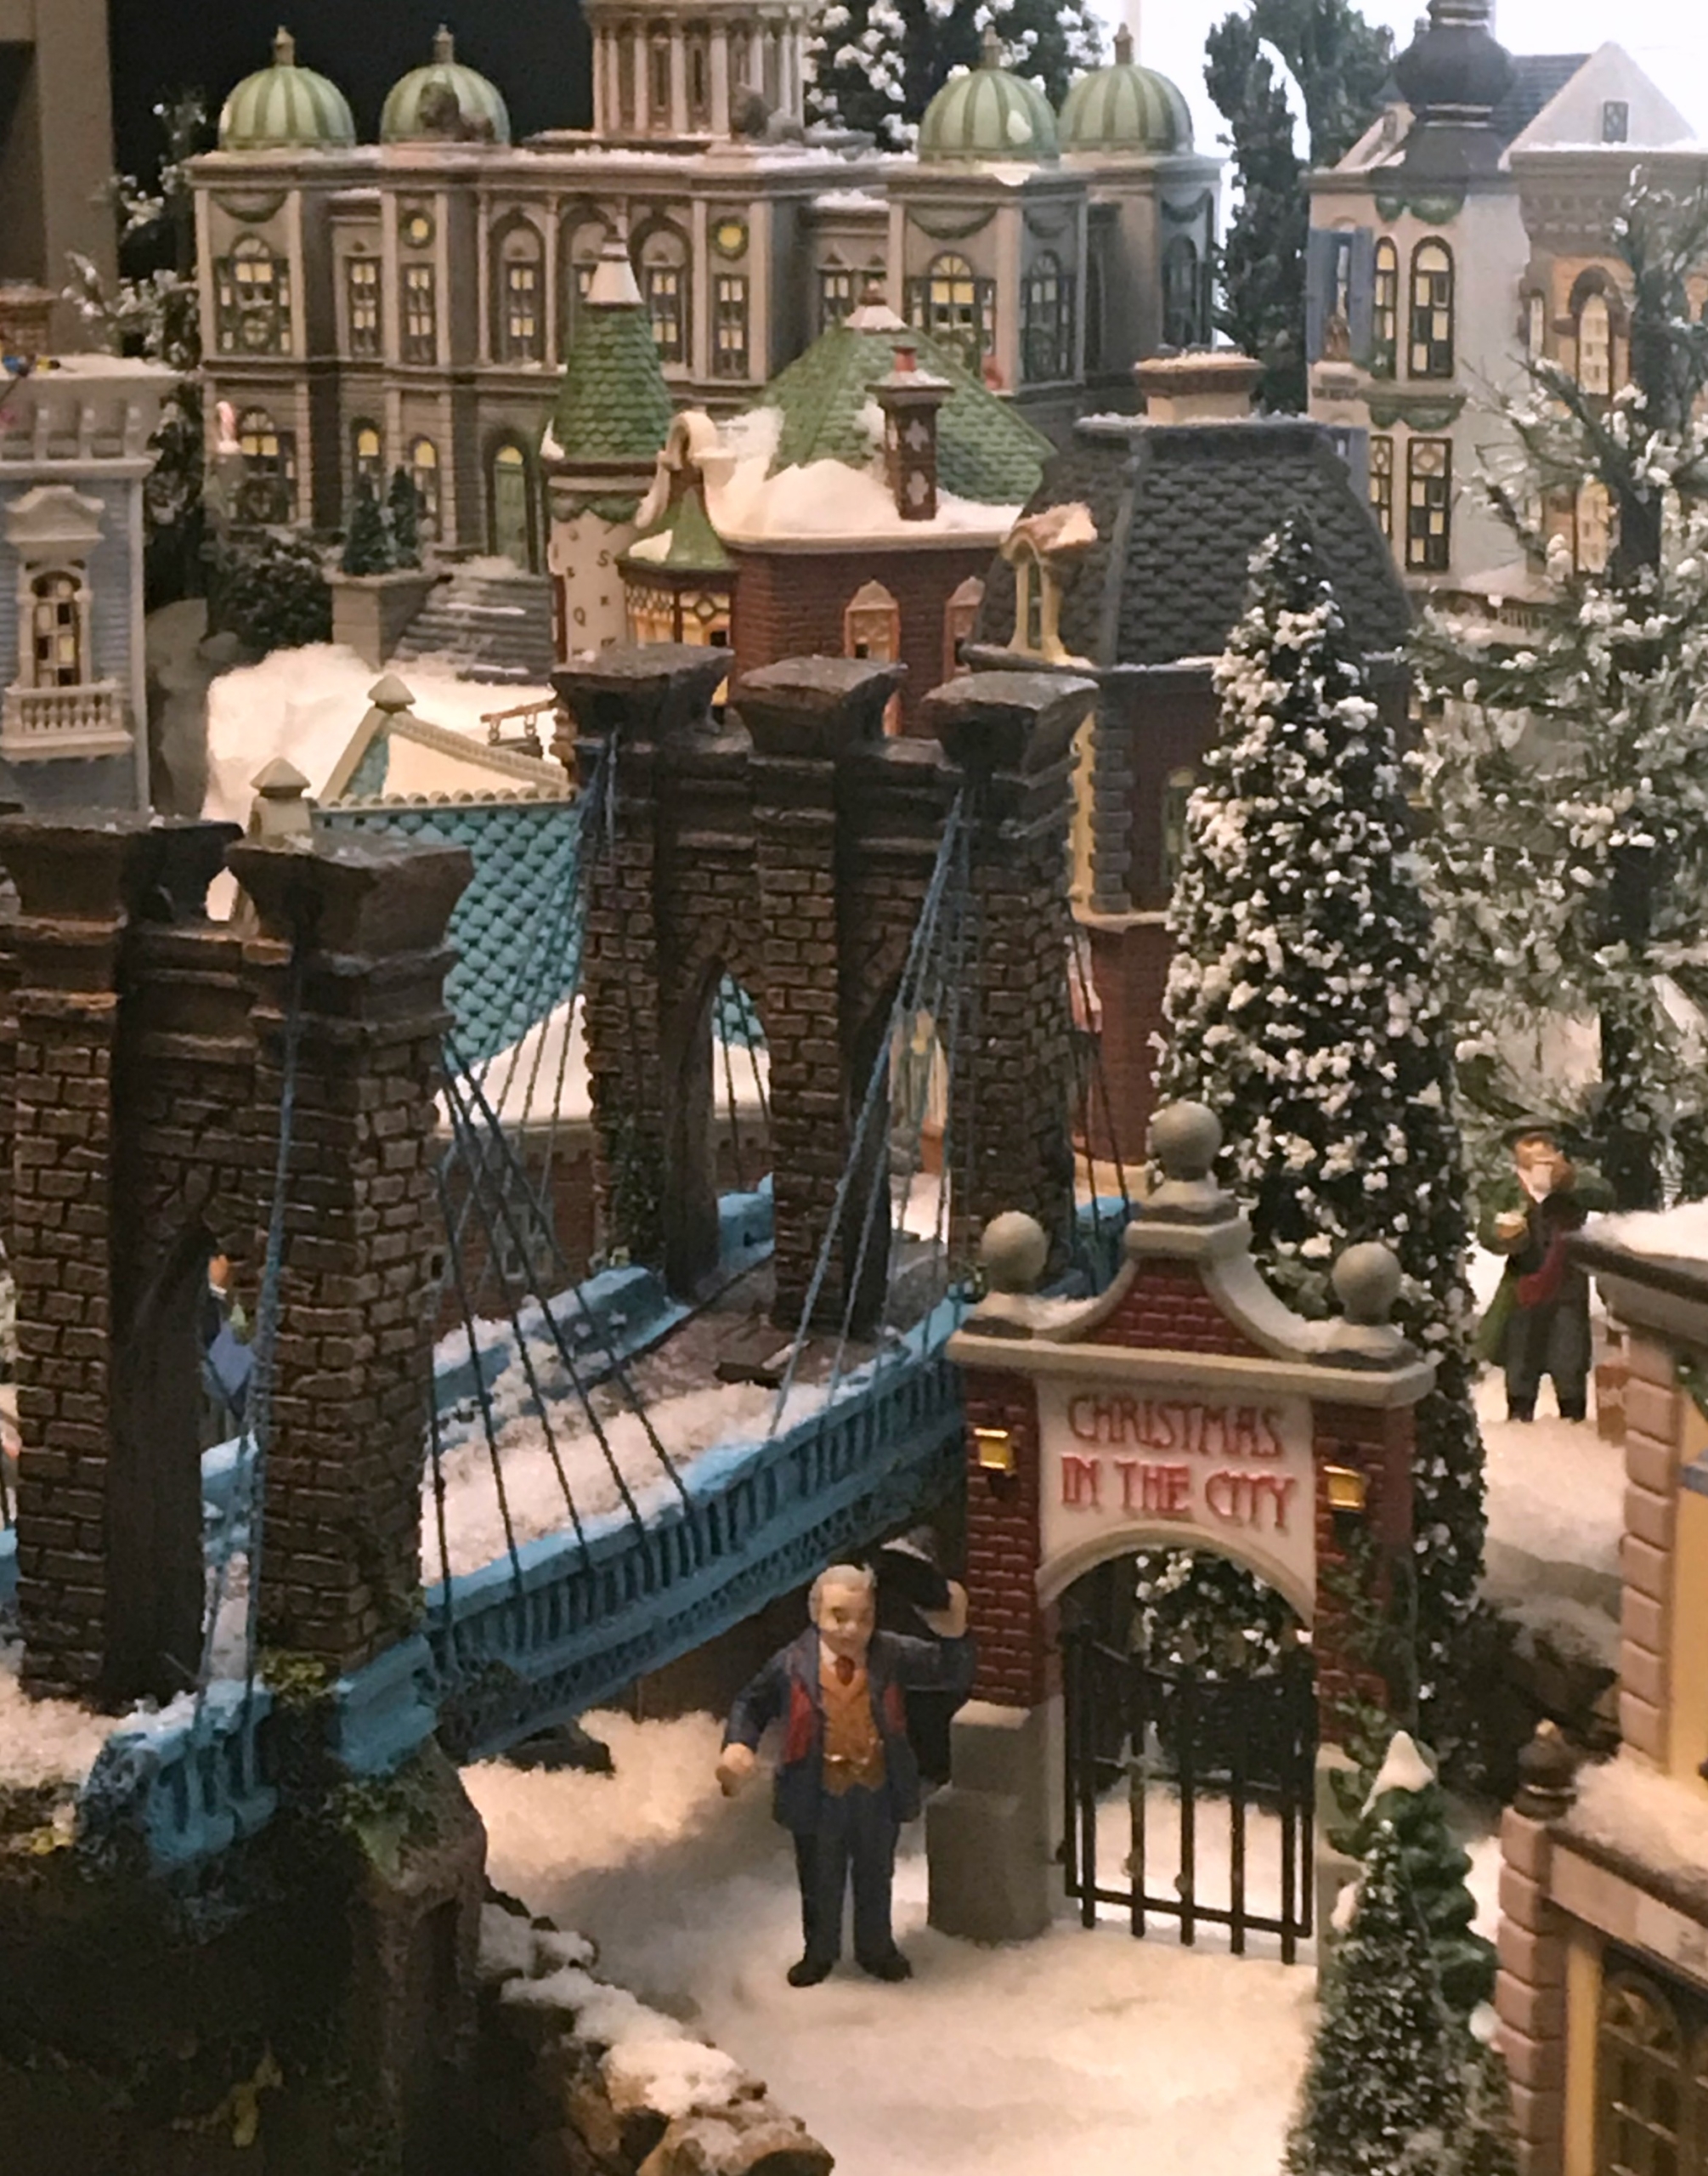 building a christmas village display - My French Twist